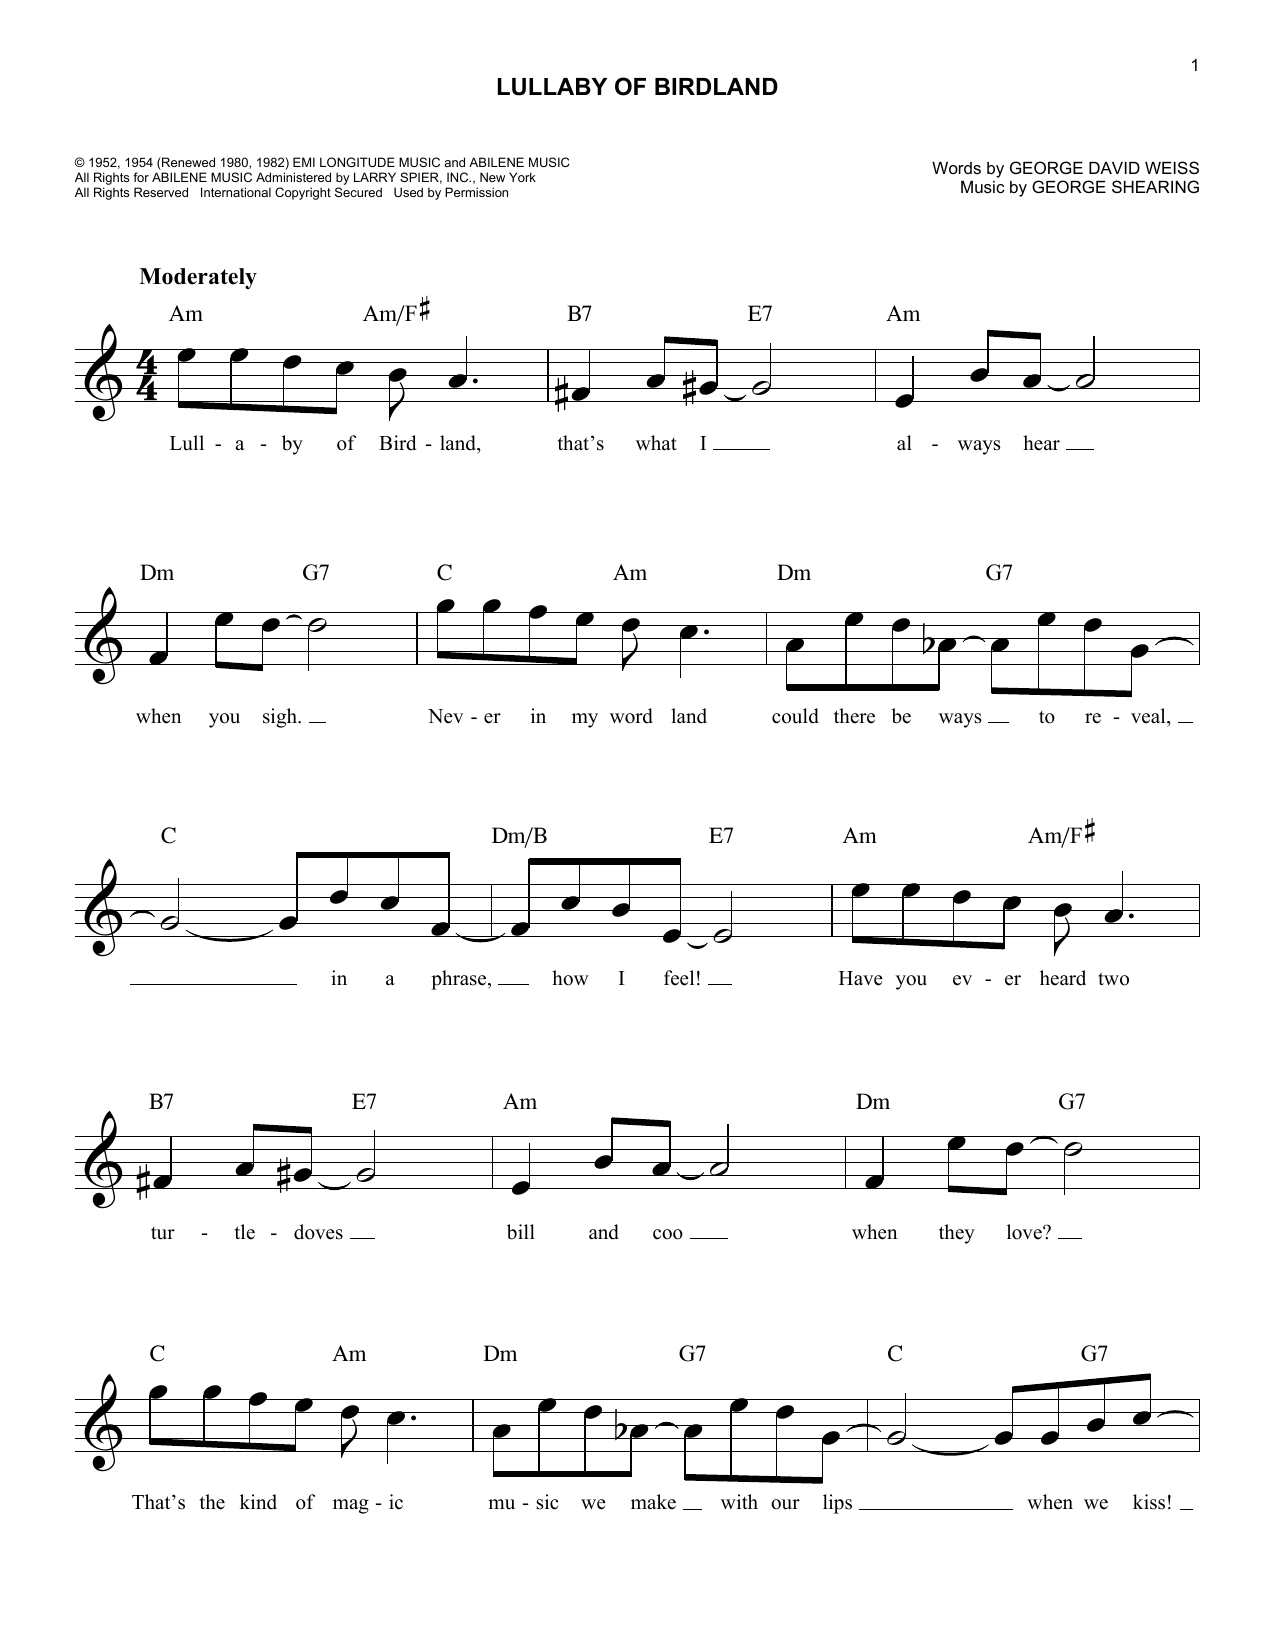 George Shearing Lullaby Of Birdland sheet music notes and chords. Download Printable PDF.